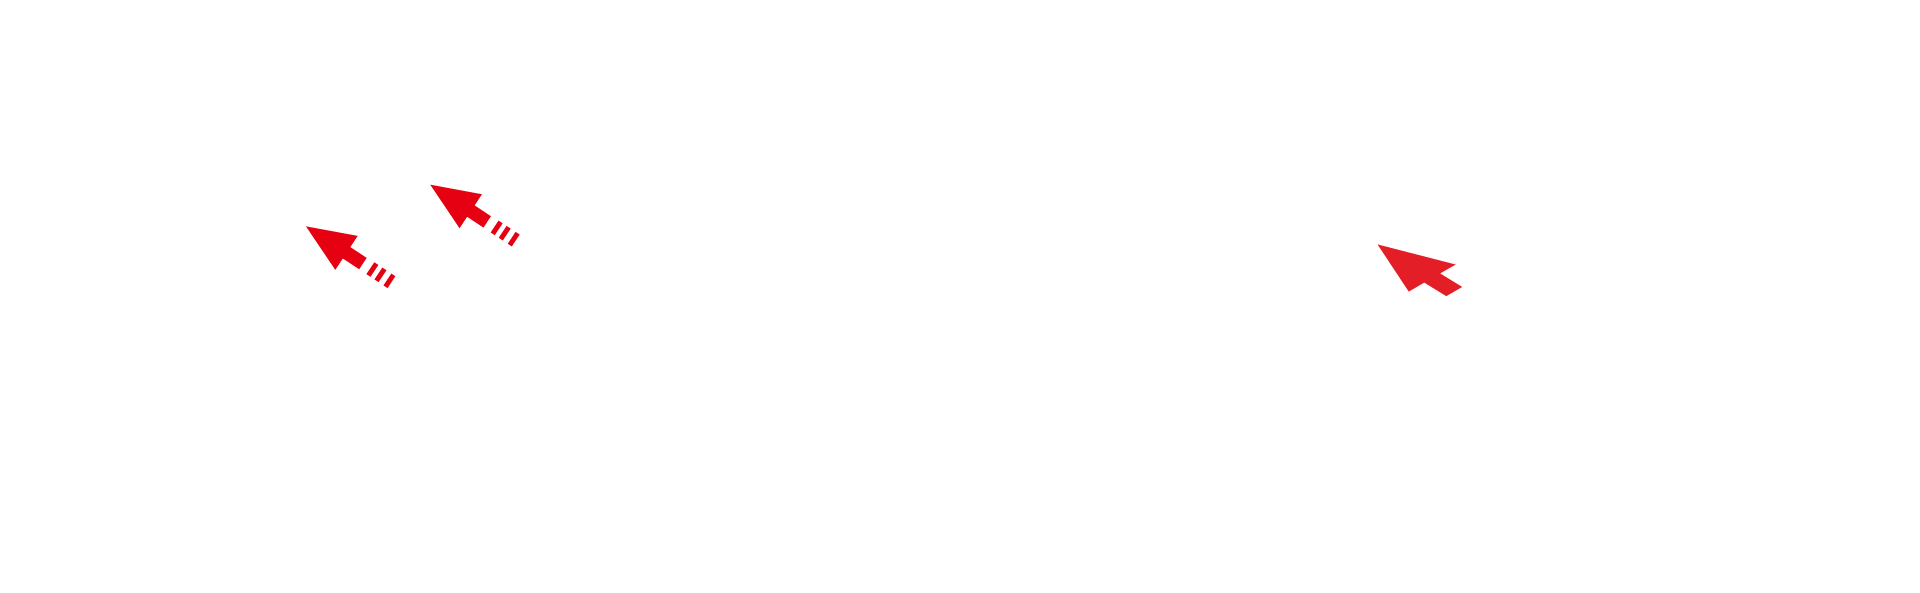 Illustration shows the differences in the drainage adapters between 2022 and 2023 generation and how they are inserted into the laptop.